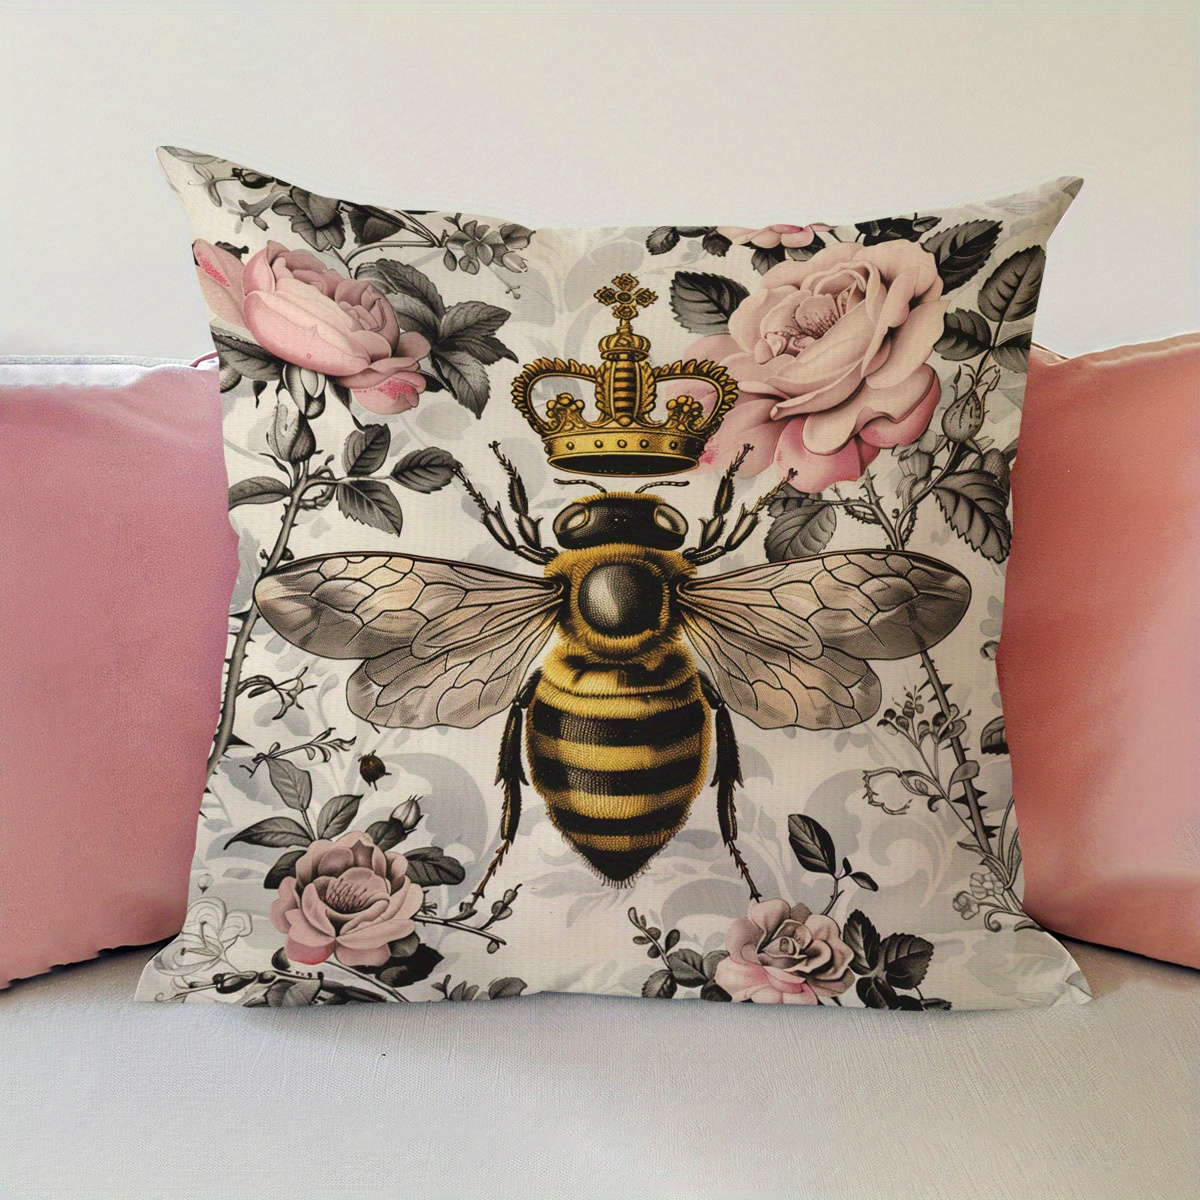 

1pc, Vintage Art, Bees, Flowers Pattern Printed Pillowcases, Cushions, Pillowcases, Suitable For Sofa Beds, Car Living Rooms, Home Decoration Room Decoration, No Pillow Core, 17.7 * 17.7 In